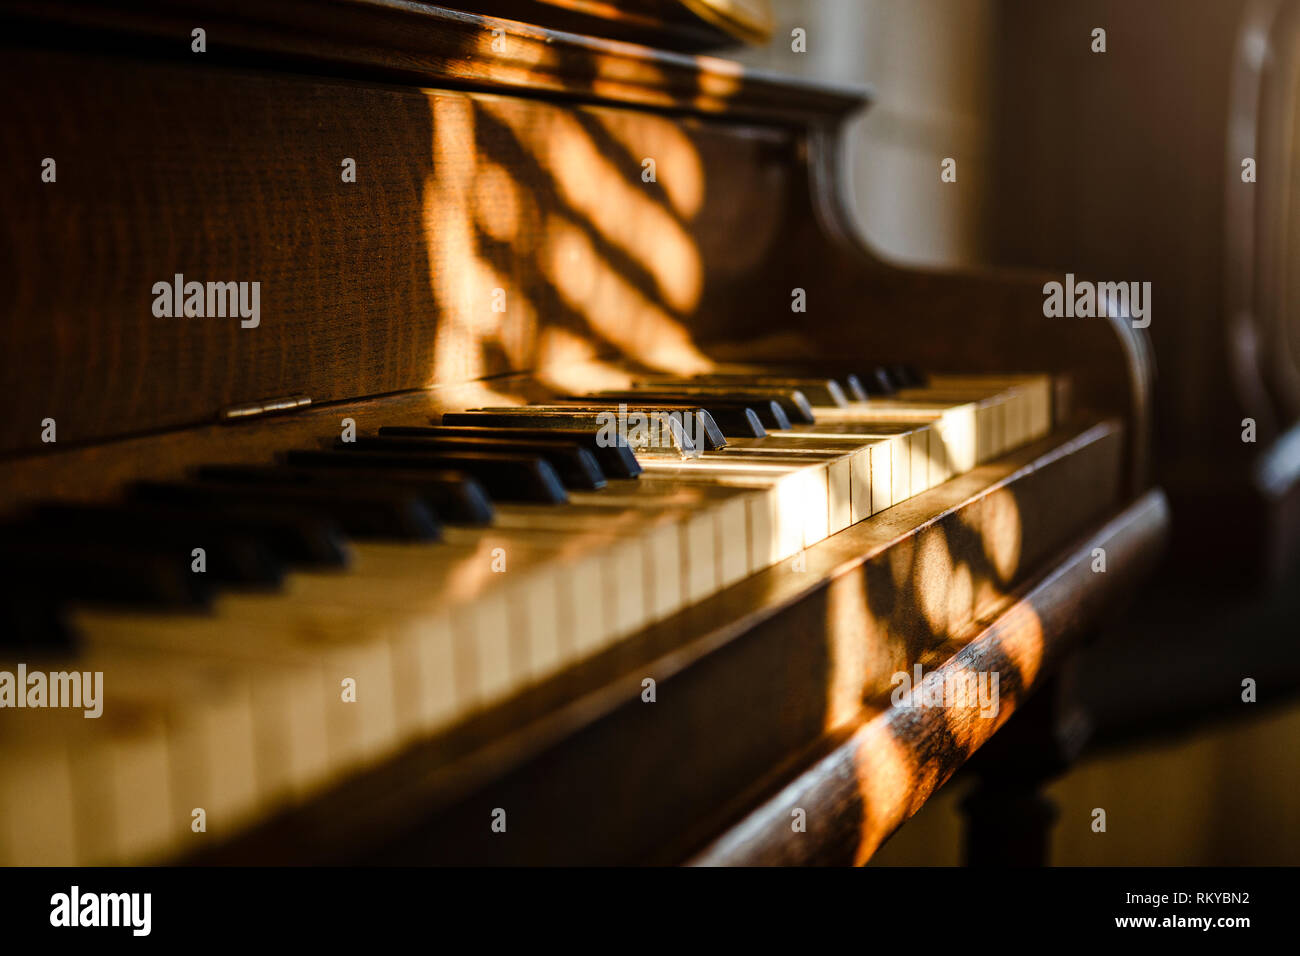 A view across a vintage piano with dappled light. Stock Photo